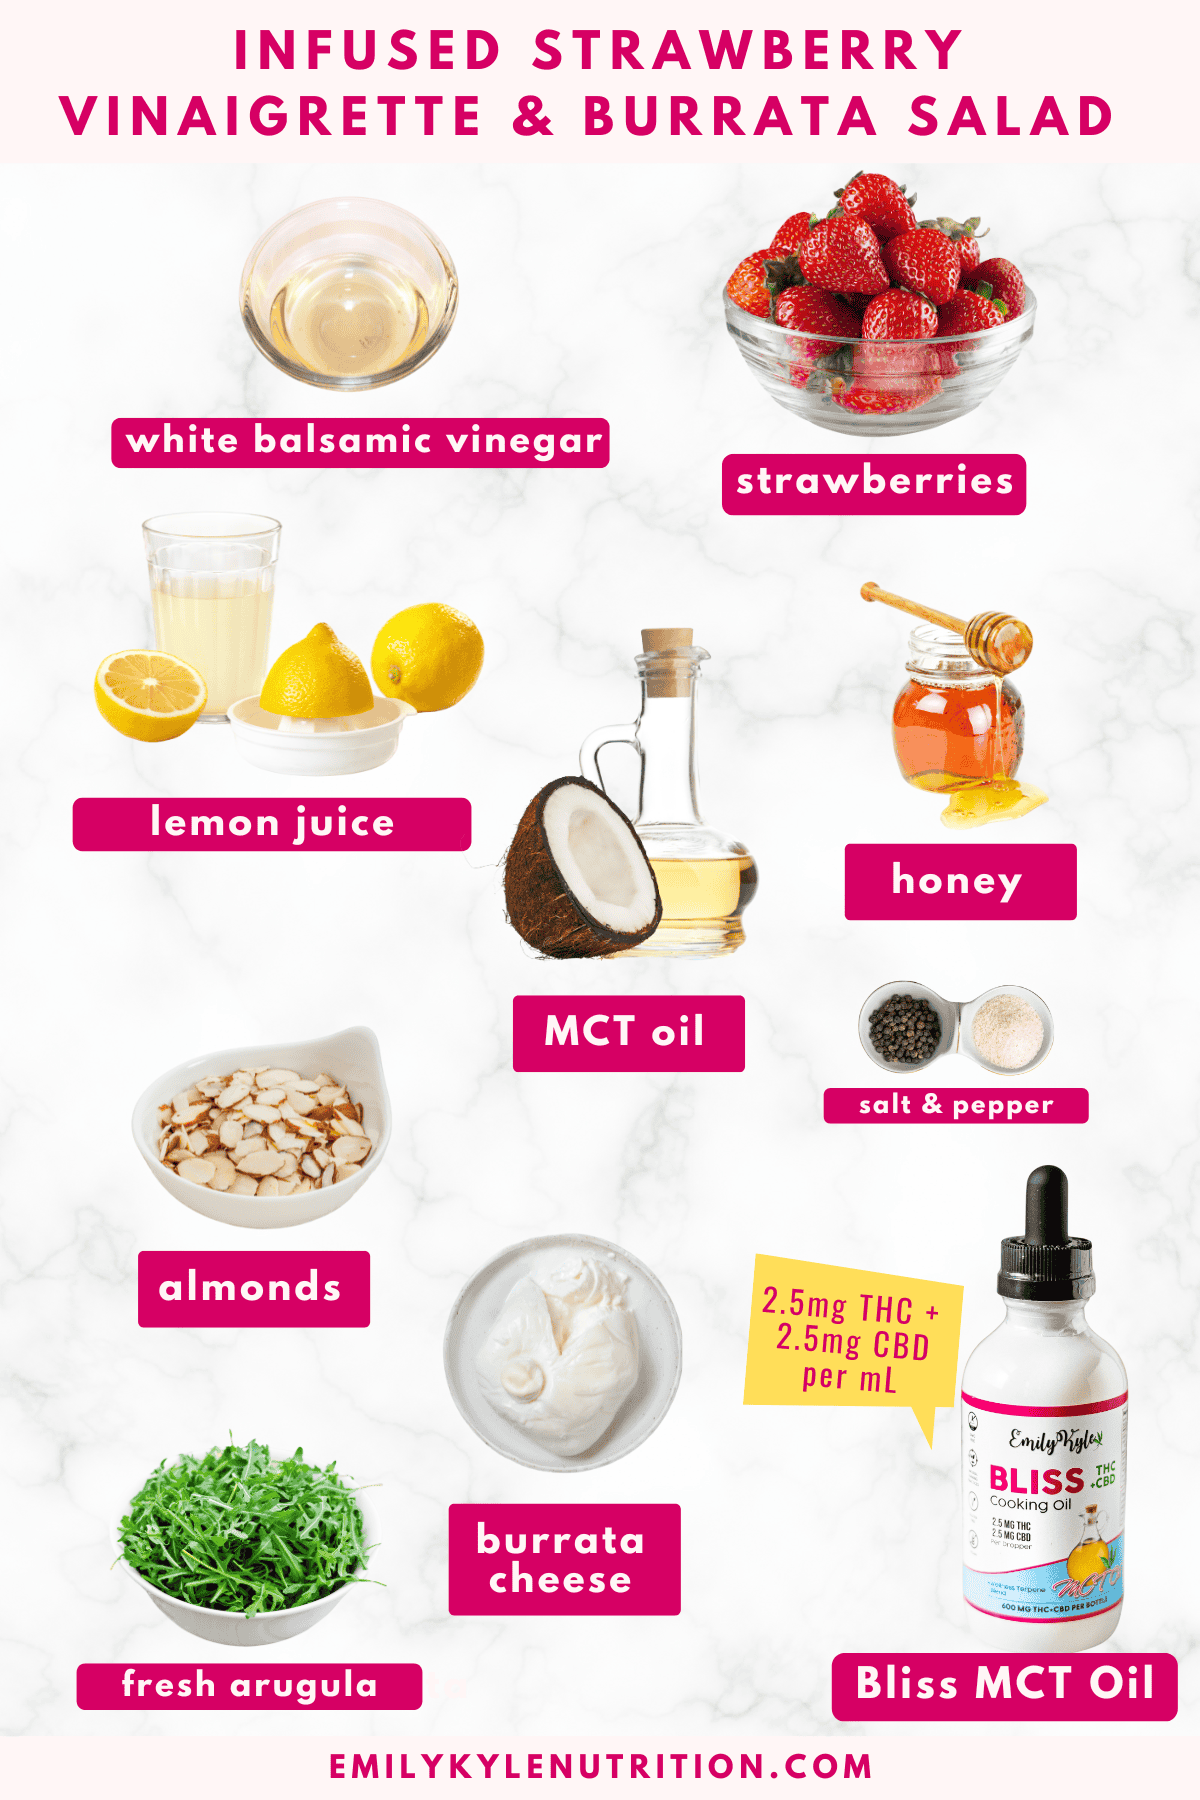 A collage of the ingredients needed to make an infused strawberry salad.